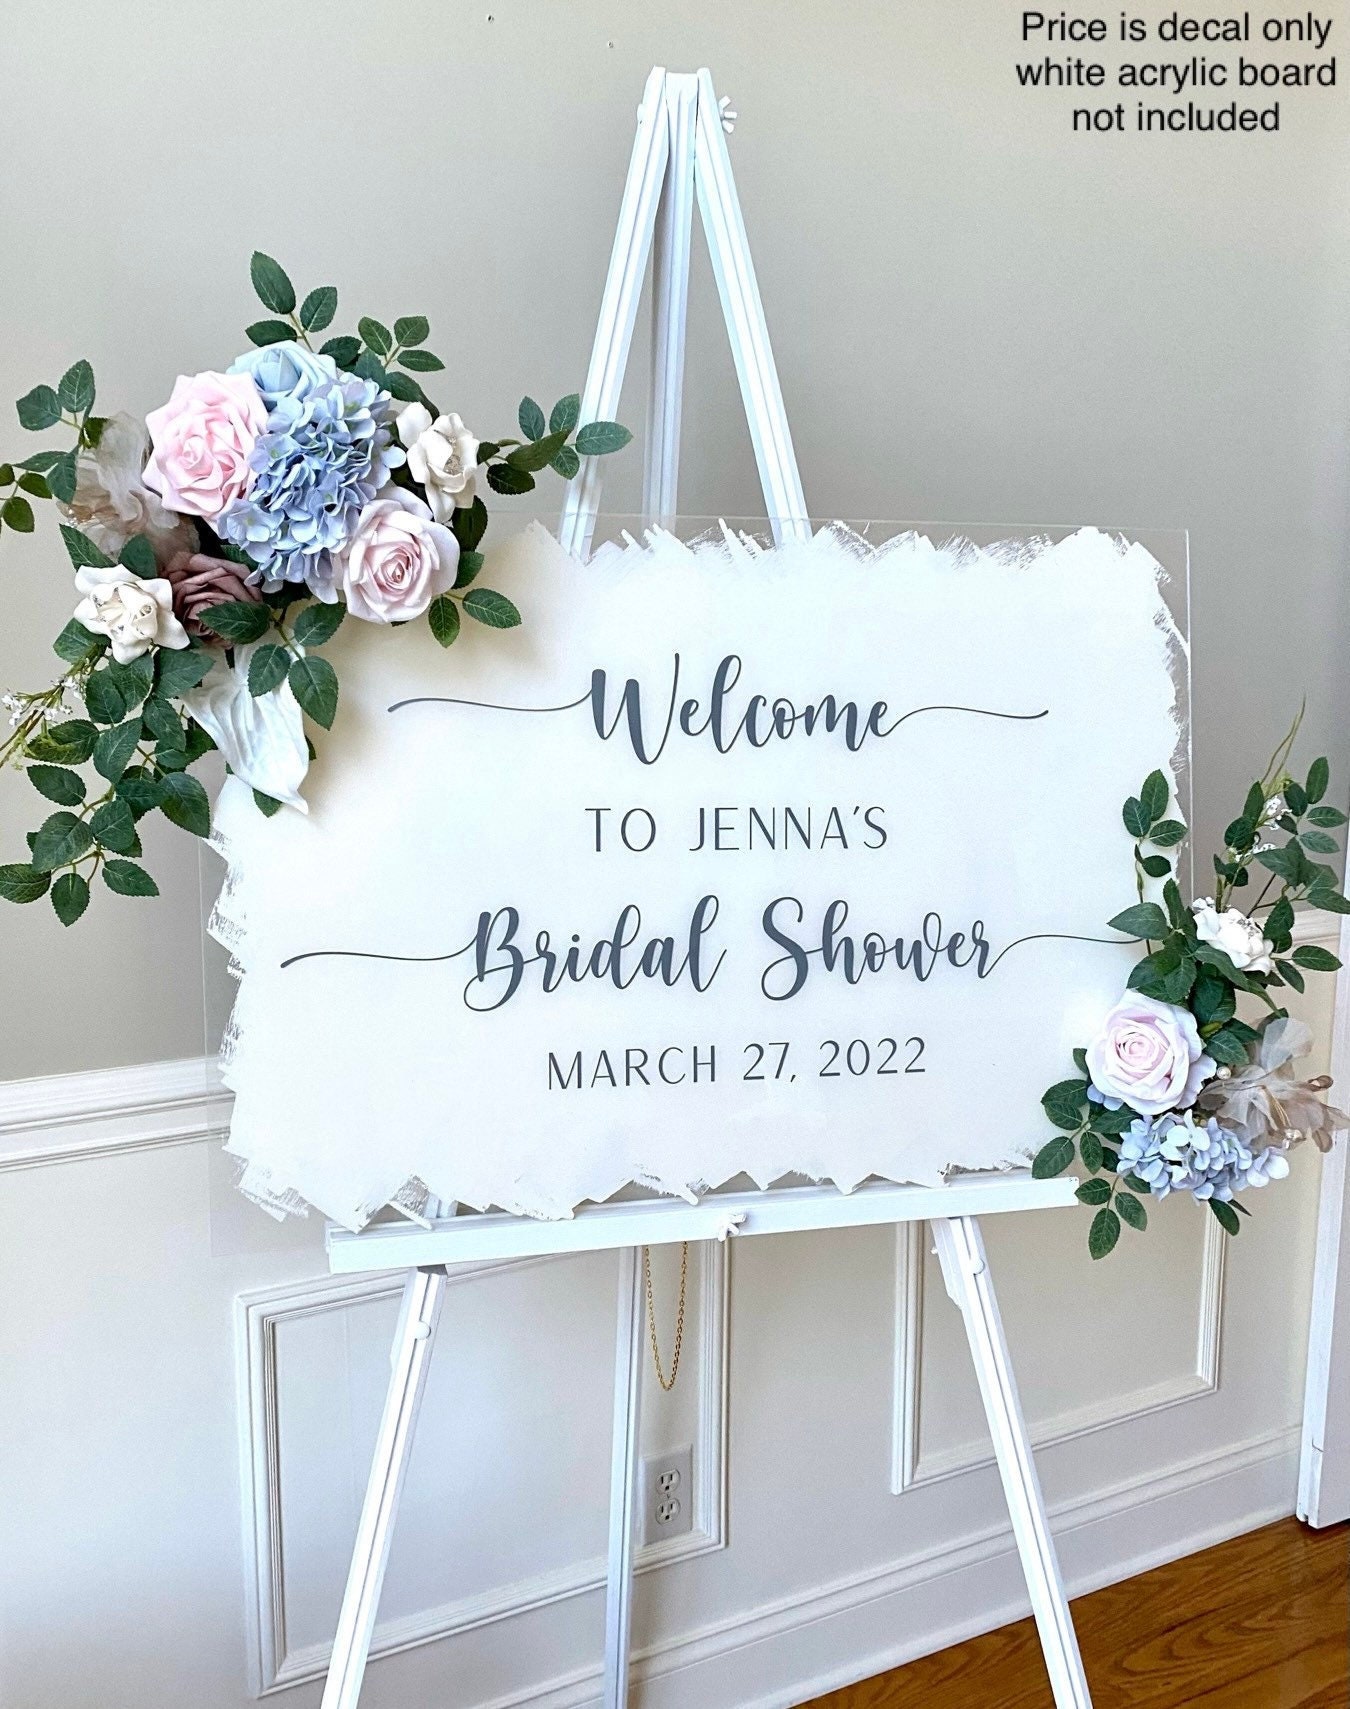 Bridal Shower Welcome Decal for Mirror Bridal Shower Decal pic